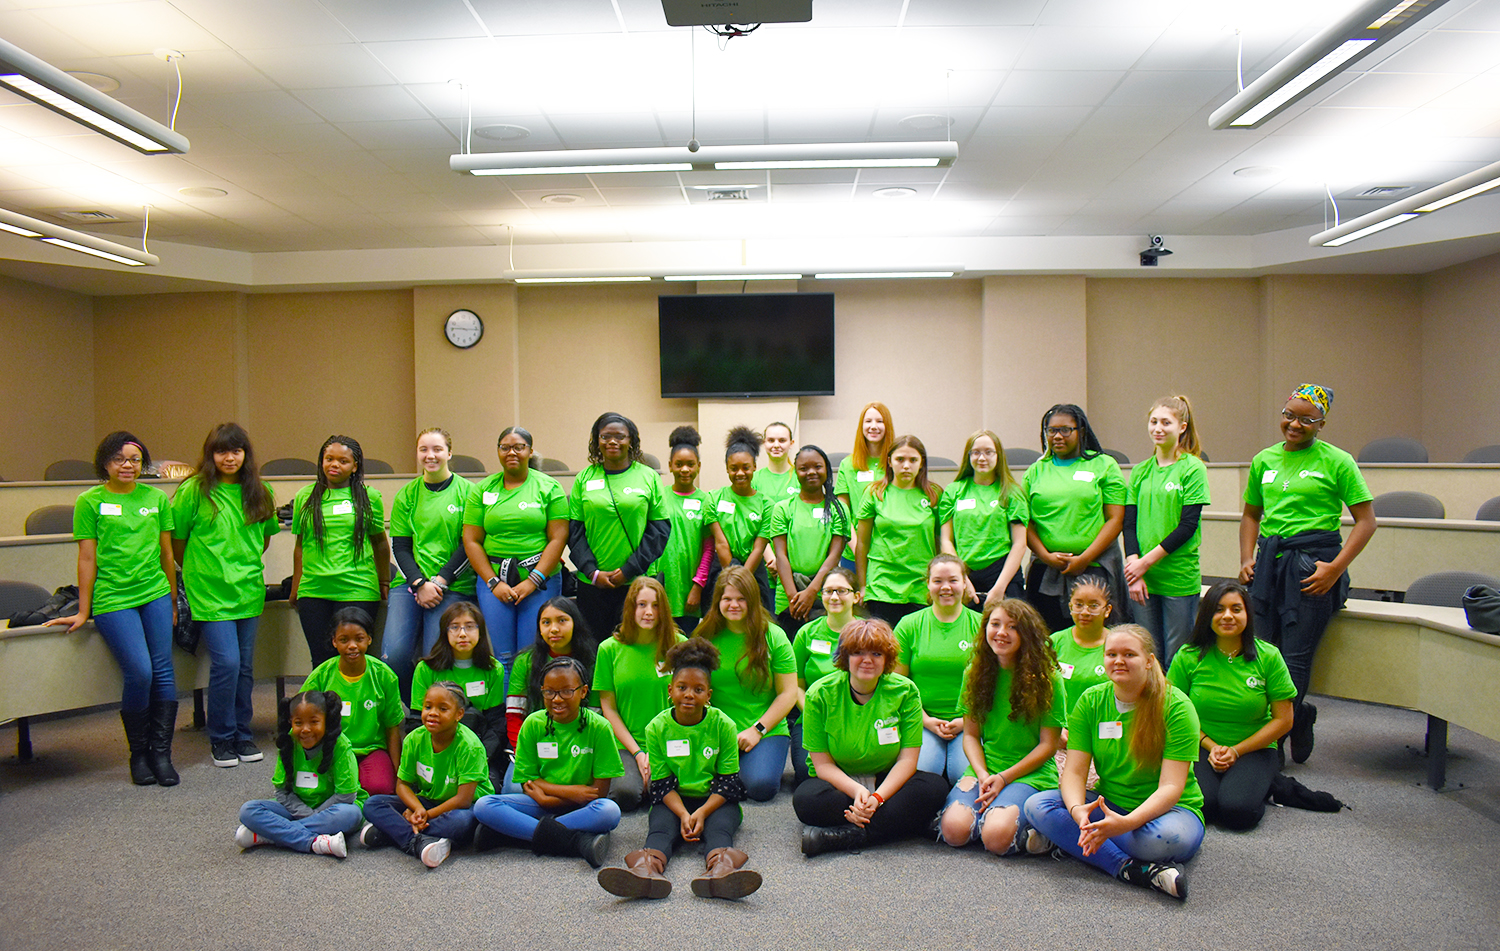 Girls Exploring Engineering all wearing green t-shirts pose for a photo.